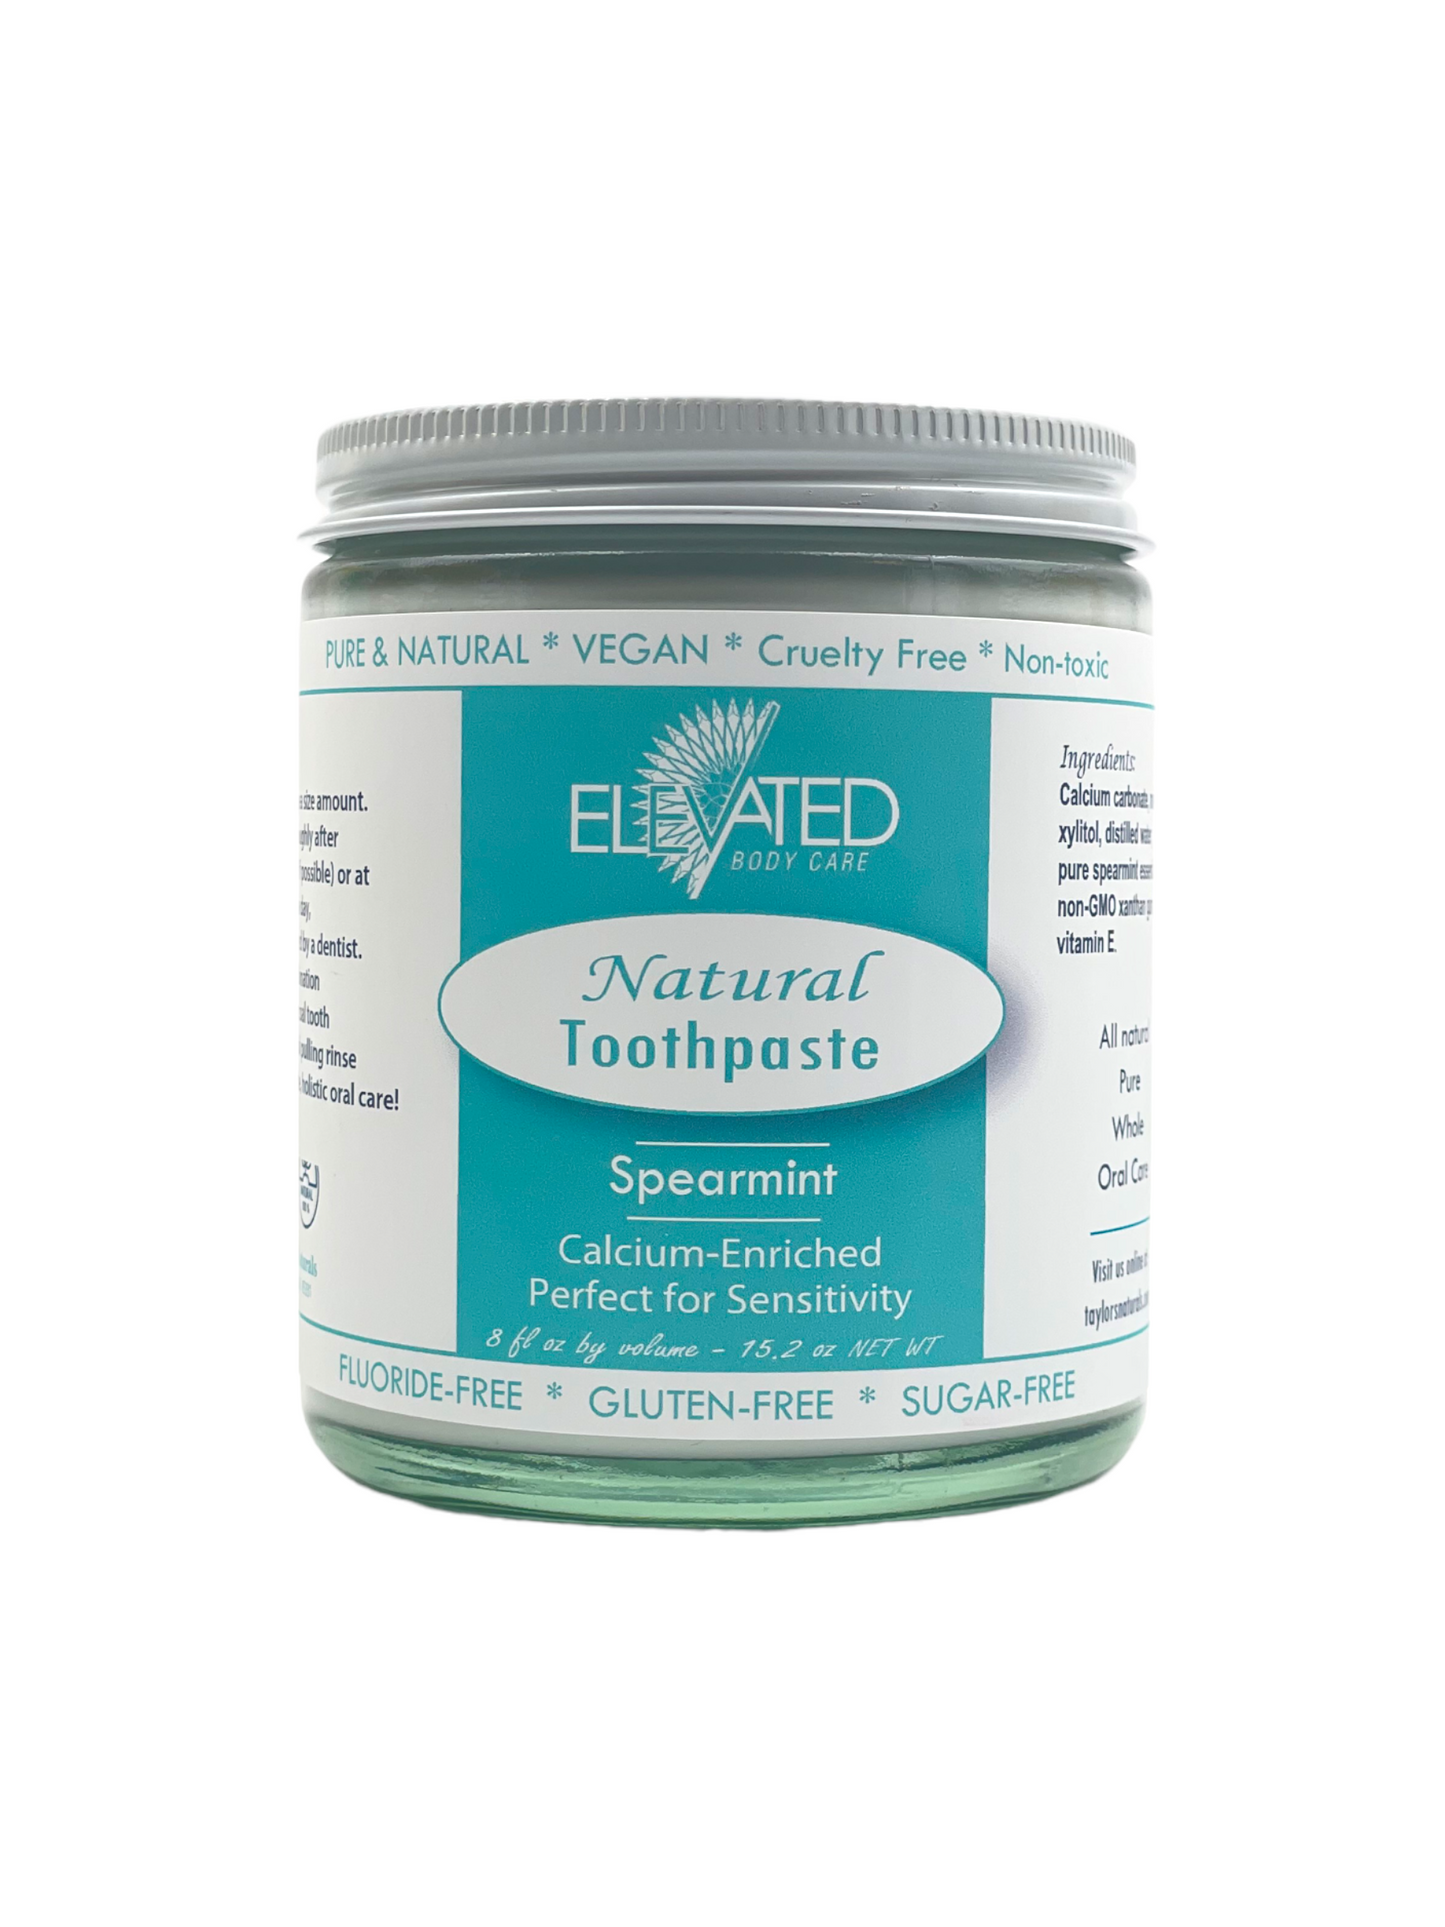 REFILL * ELEVATED - Natural Toothpaste - Plastic FREE jar *Fluoride FREE & Chemical FREE